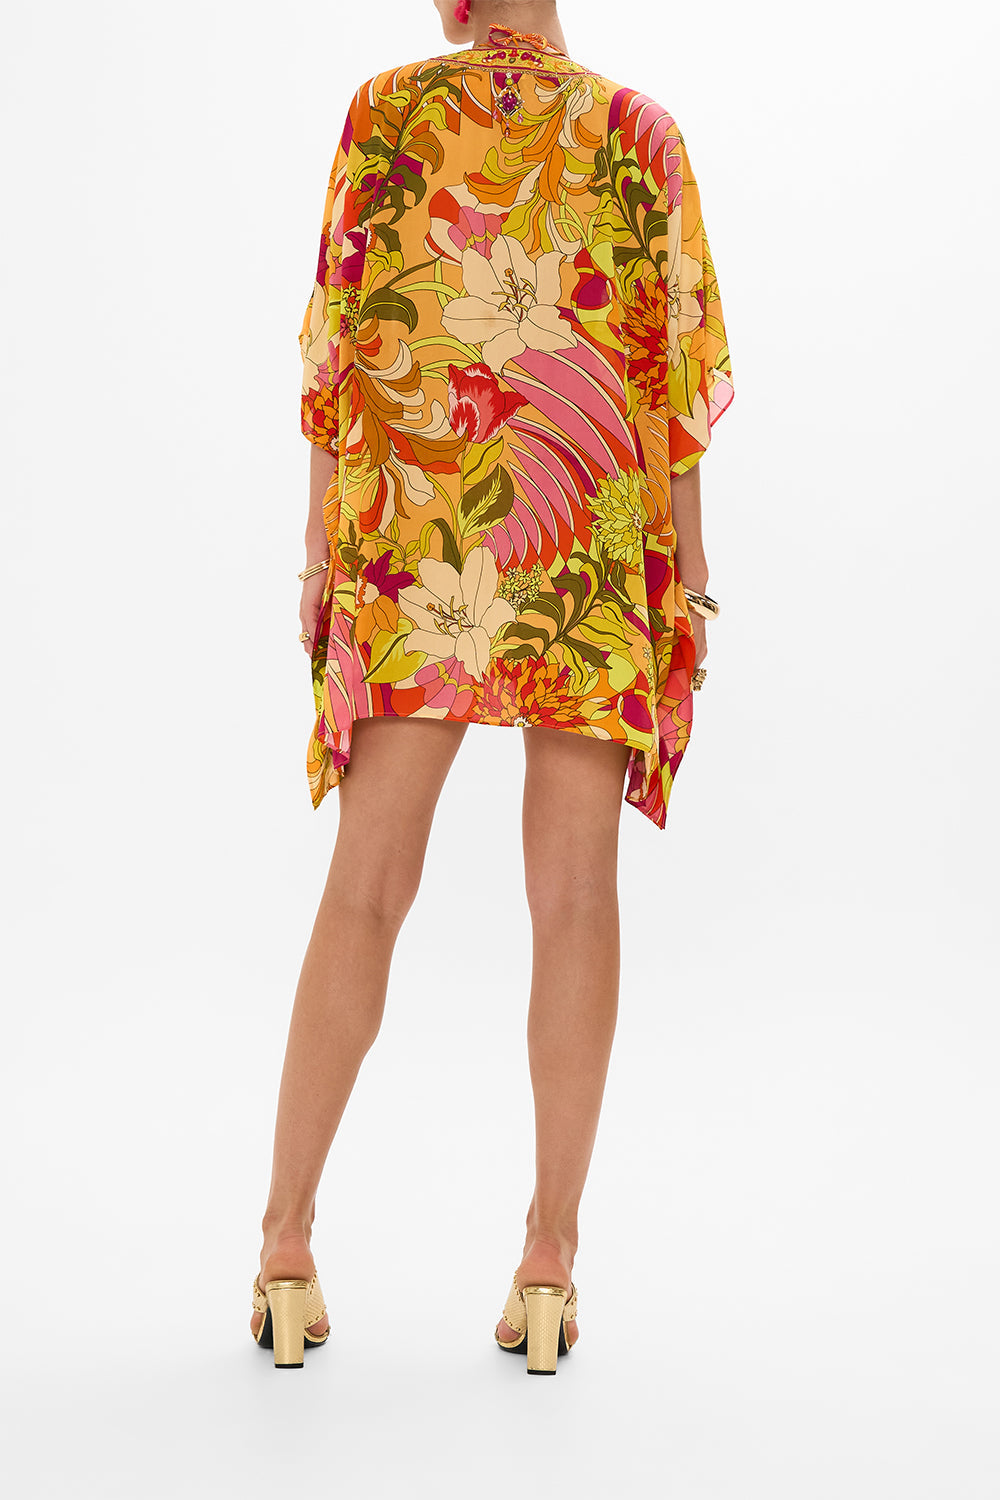 CAMILLA Floral Short Lace Up Kaftan in The Flower Child Society print